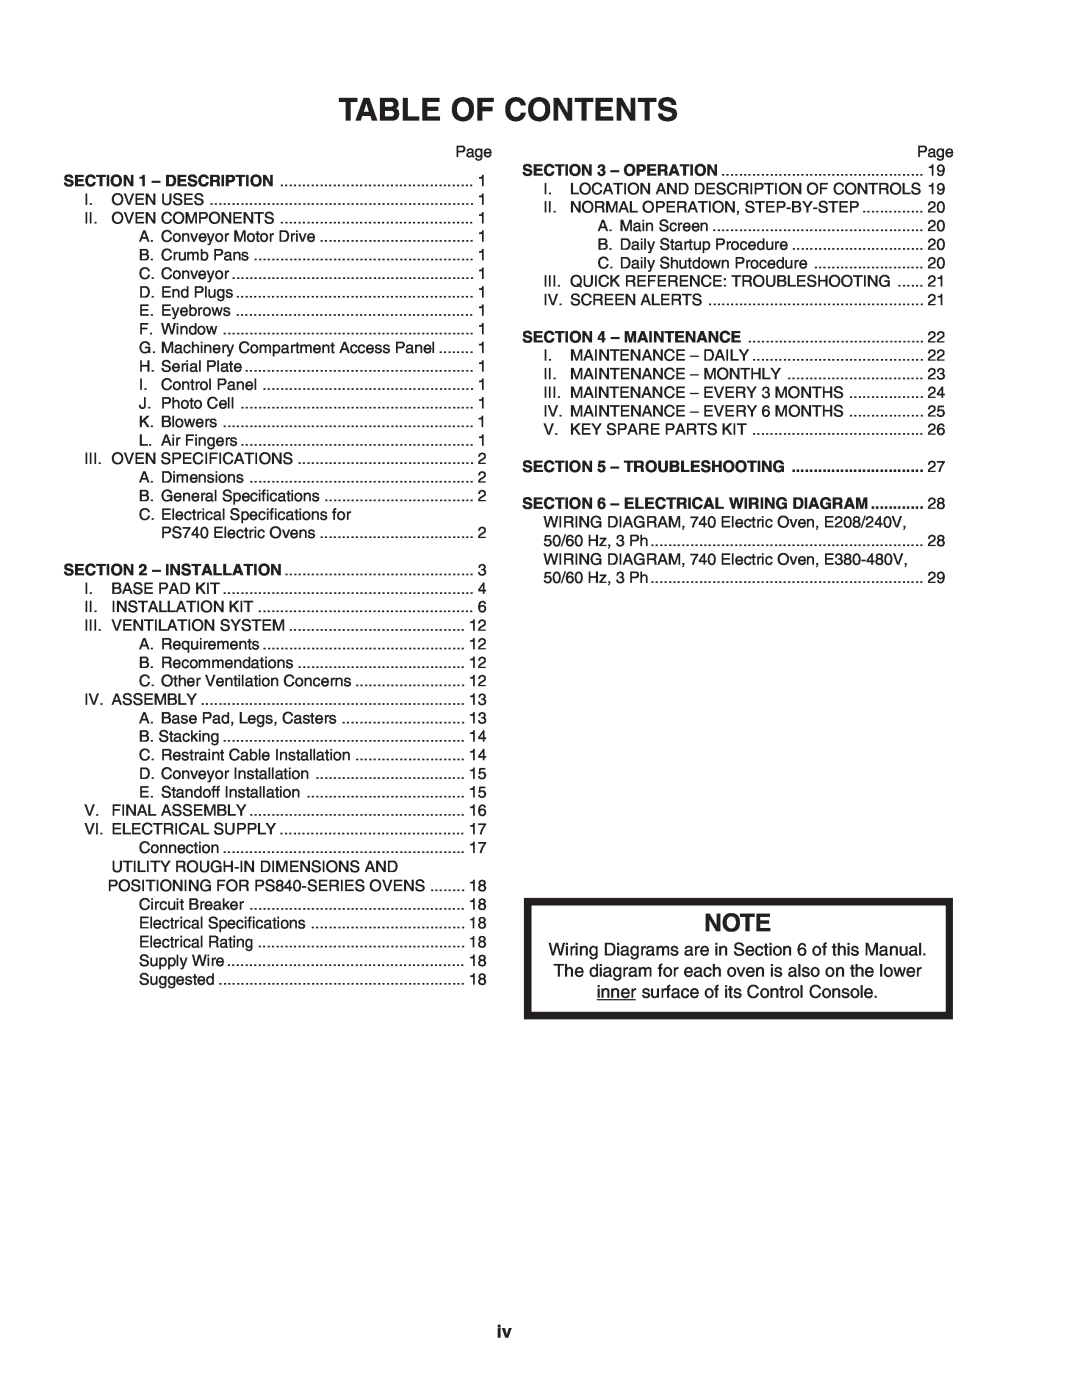 Middleby Marshall PS740E installation manual Table Of Contents, Operation, Troubleshooting, Electrical Wiring Diagram 